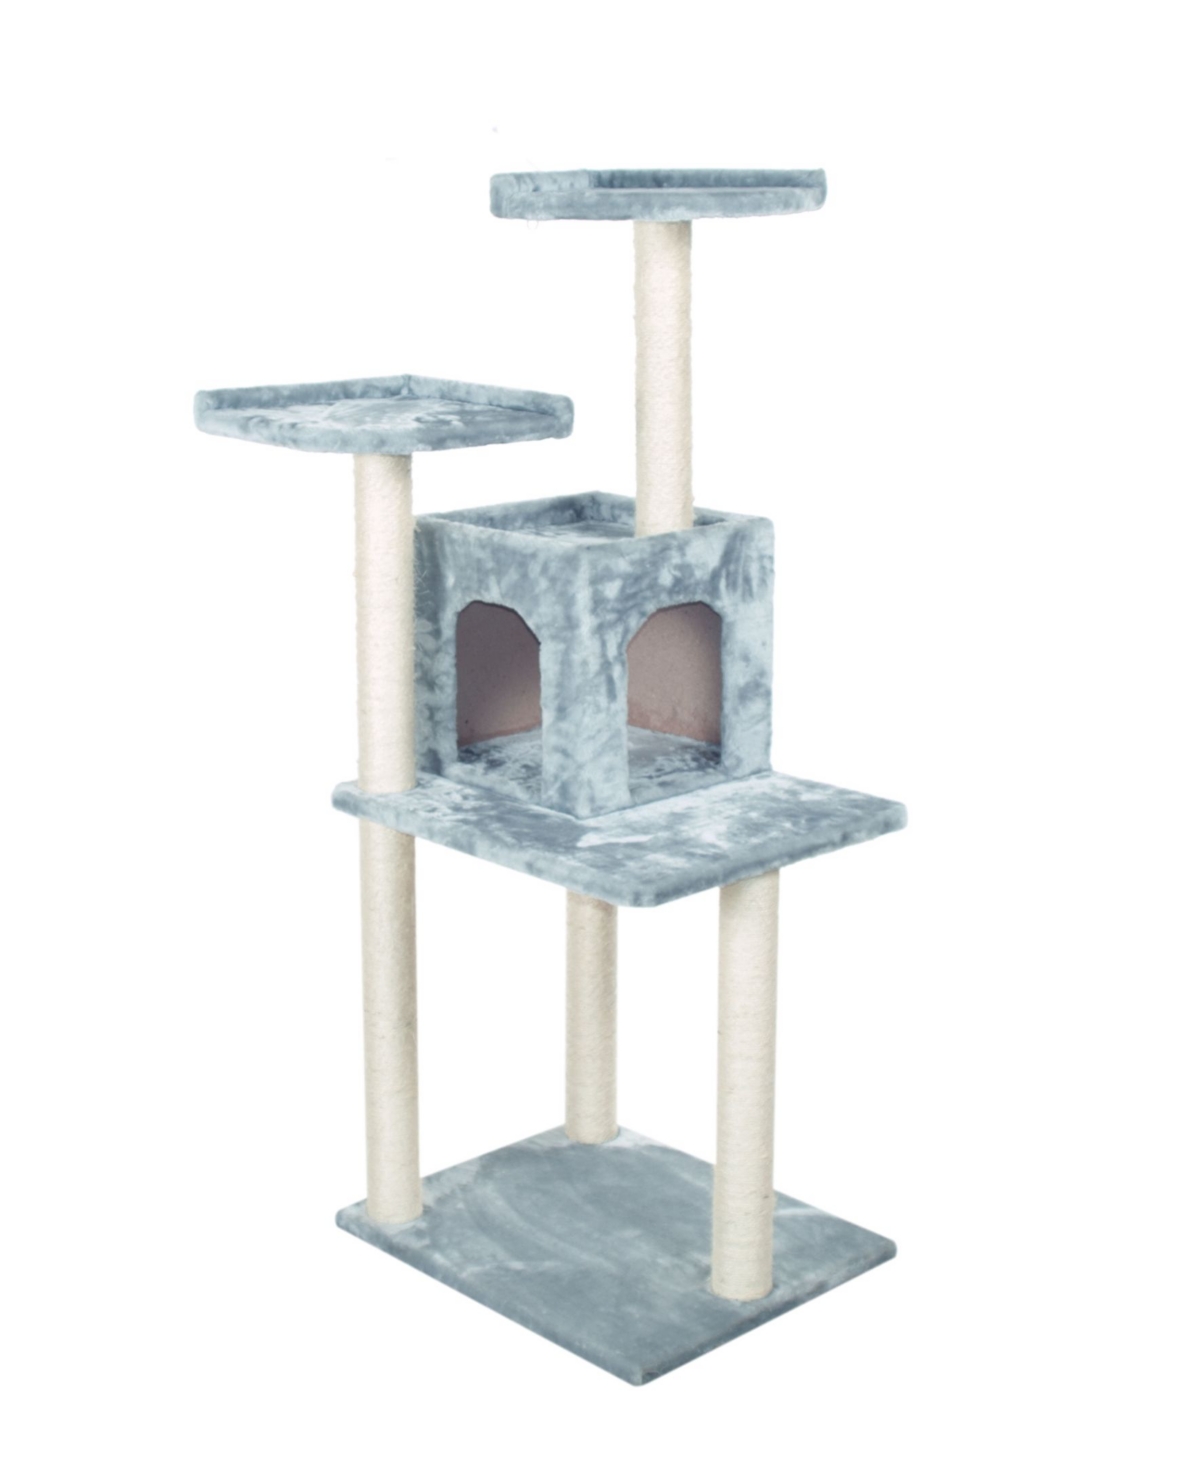 57-Inch Real Wood Cat Tree With Two-Door Condo - Silver-Tone and Gray